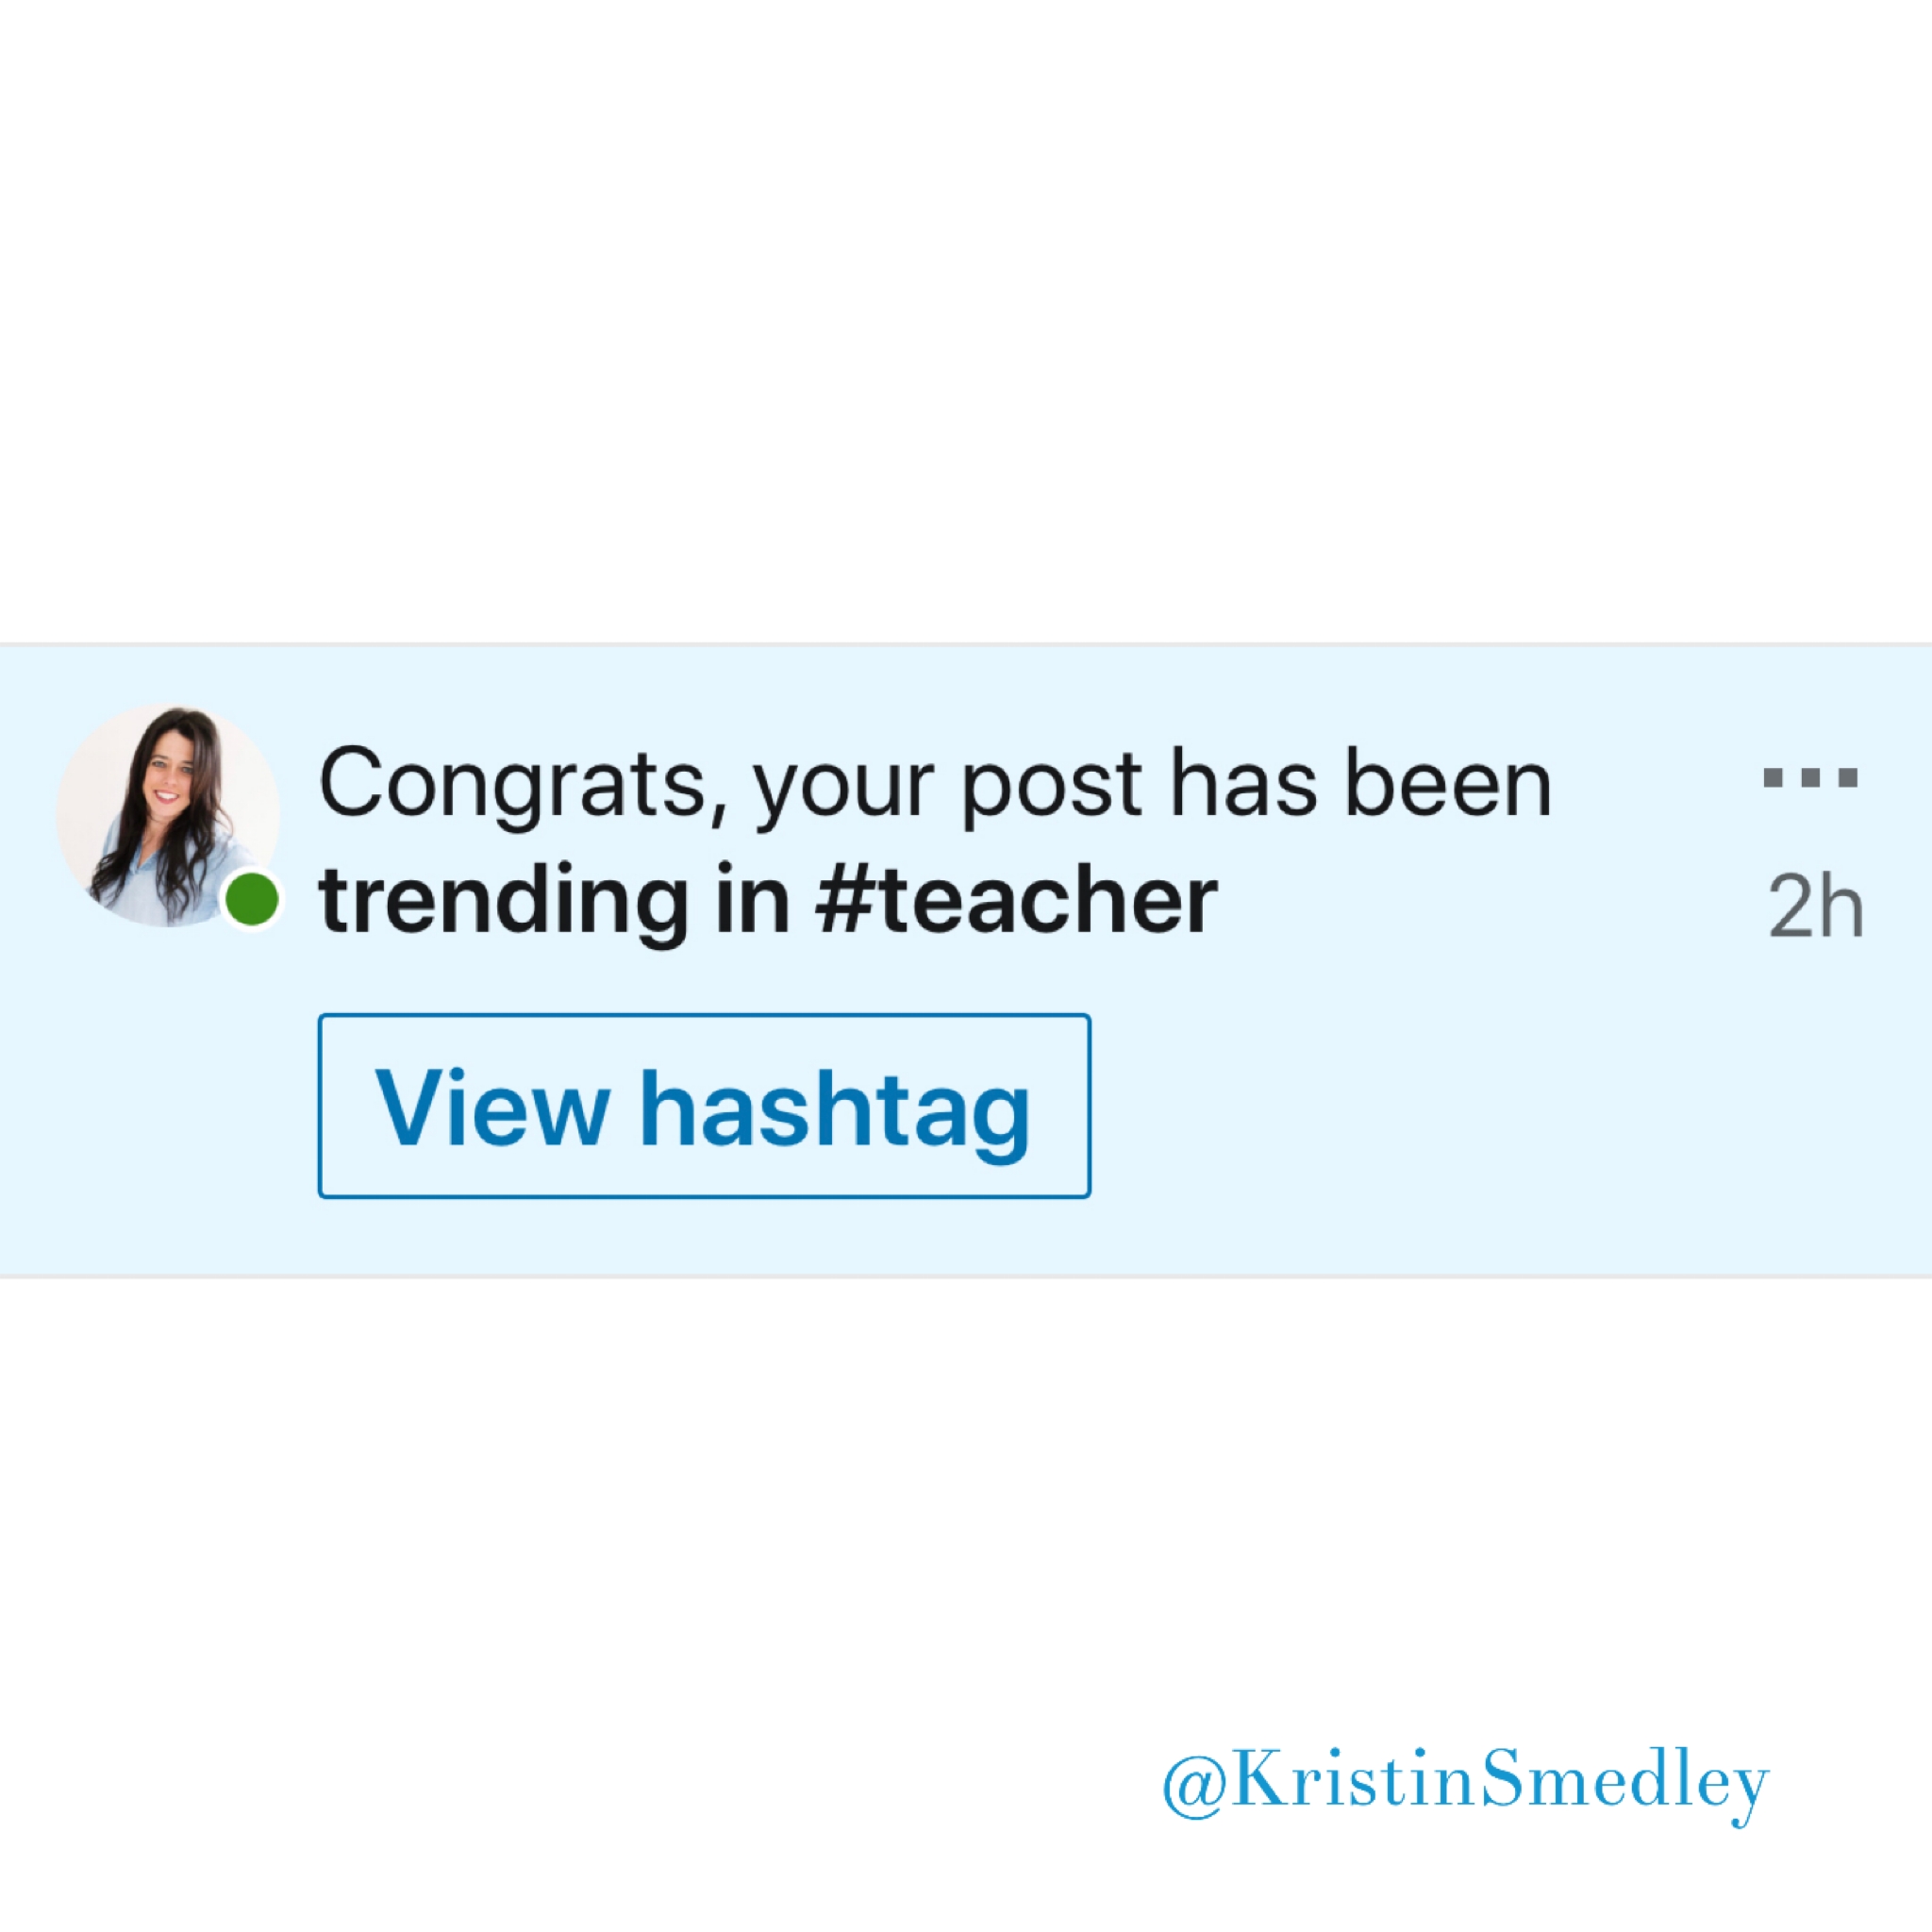 linked in notification that says "your post is trending in #teaching"